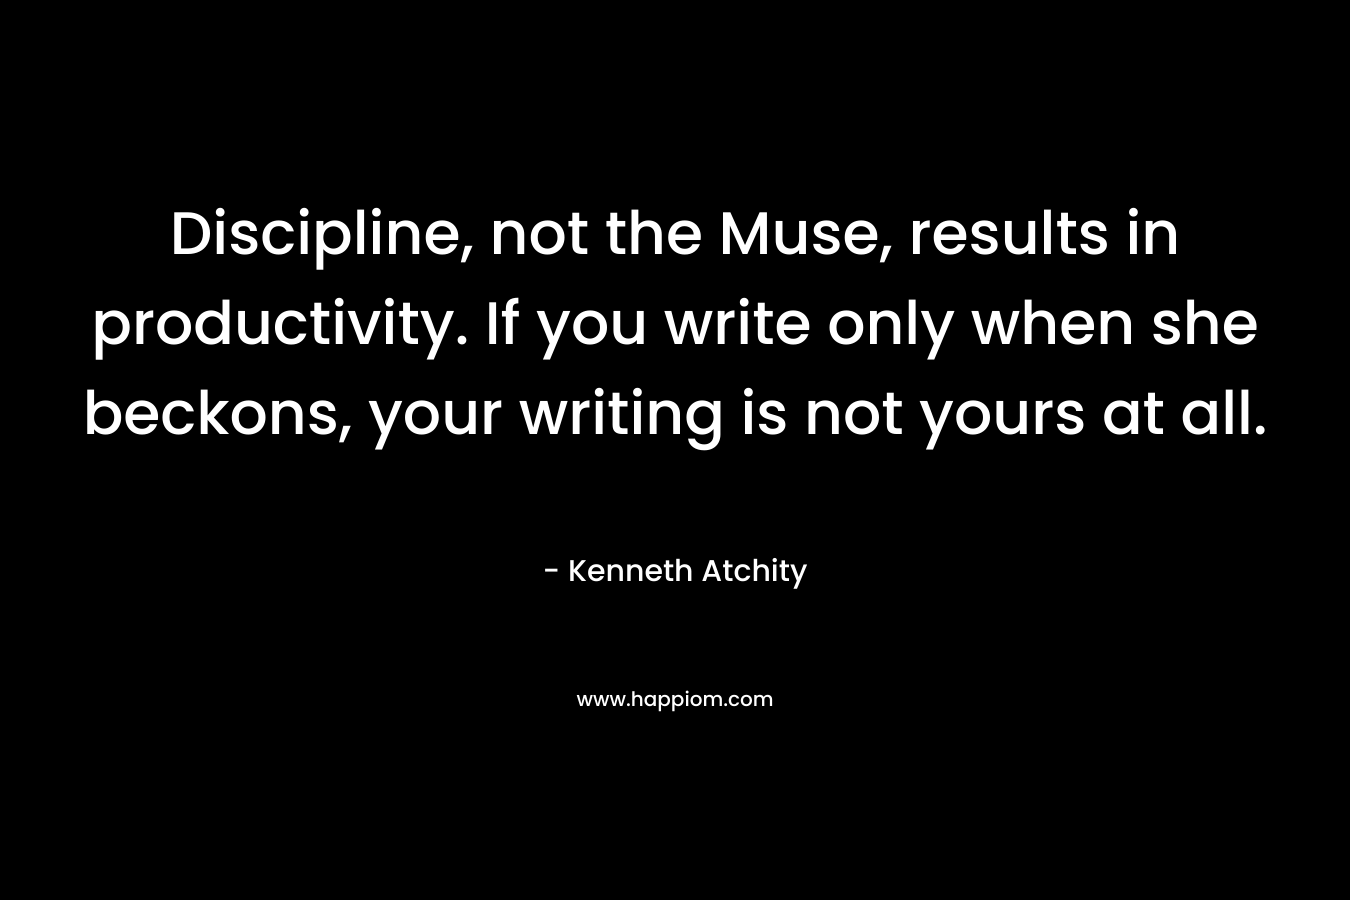 Discipline, not the Muse, results in productivity. If you write only when she beckons, your writing is not yours at all. – Kenneth Atchity